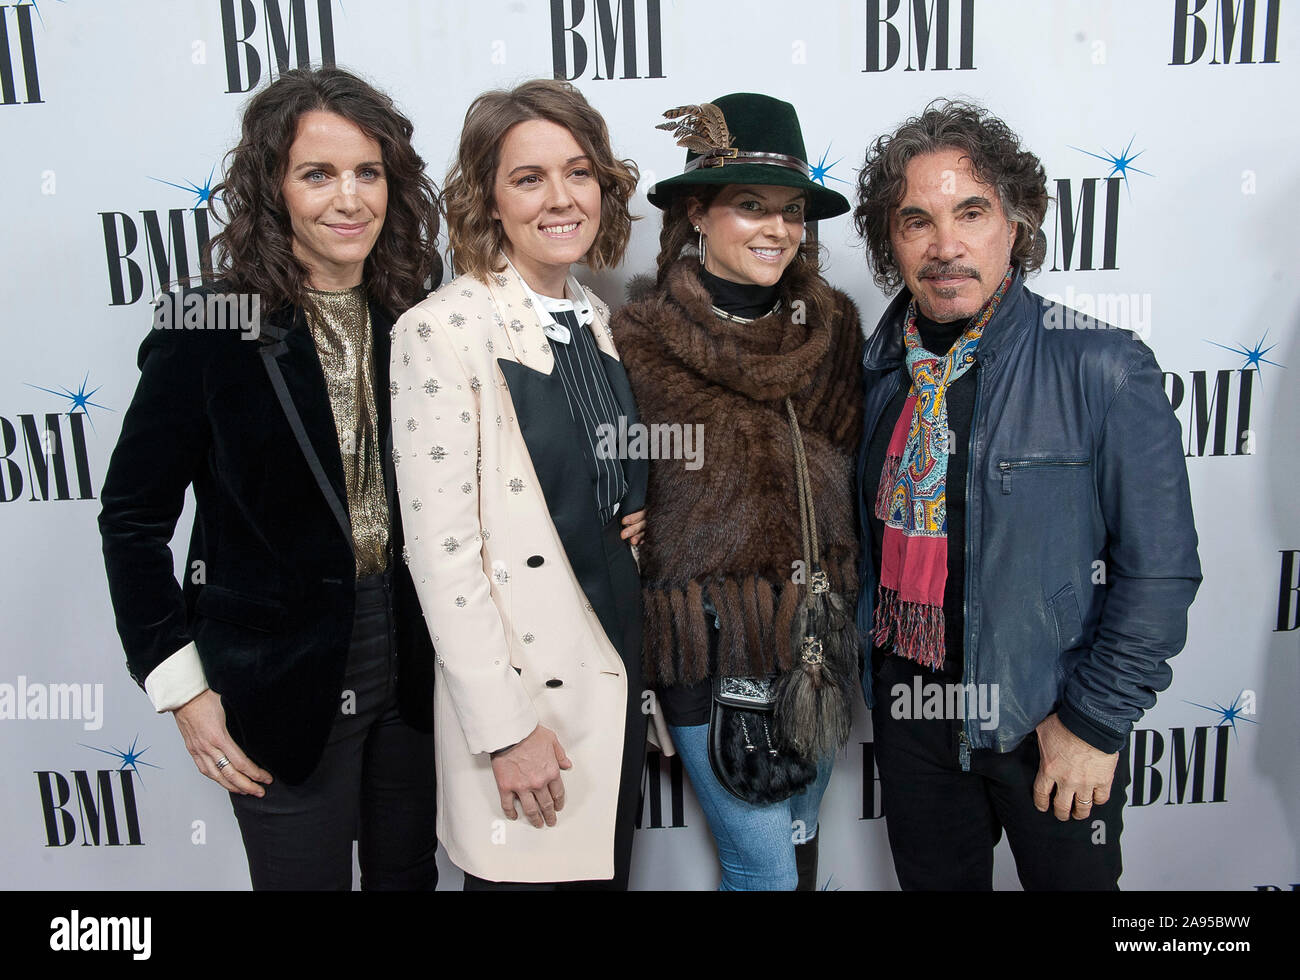 Nov. 12, 2019 - Nashville, Tennessee; USA - Musician JOHN OATES and BELINDA CARLISLE attends the 67th Annual BMI Country Awards at BMI Building located in Nashville.   Copyright 2019 Jason Moore. (Credit Image: © Jason Moore/ZUMA Wire) Stock Photo